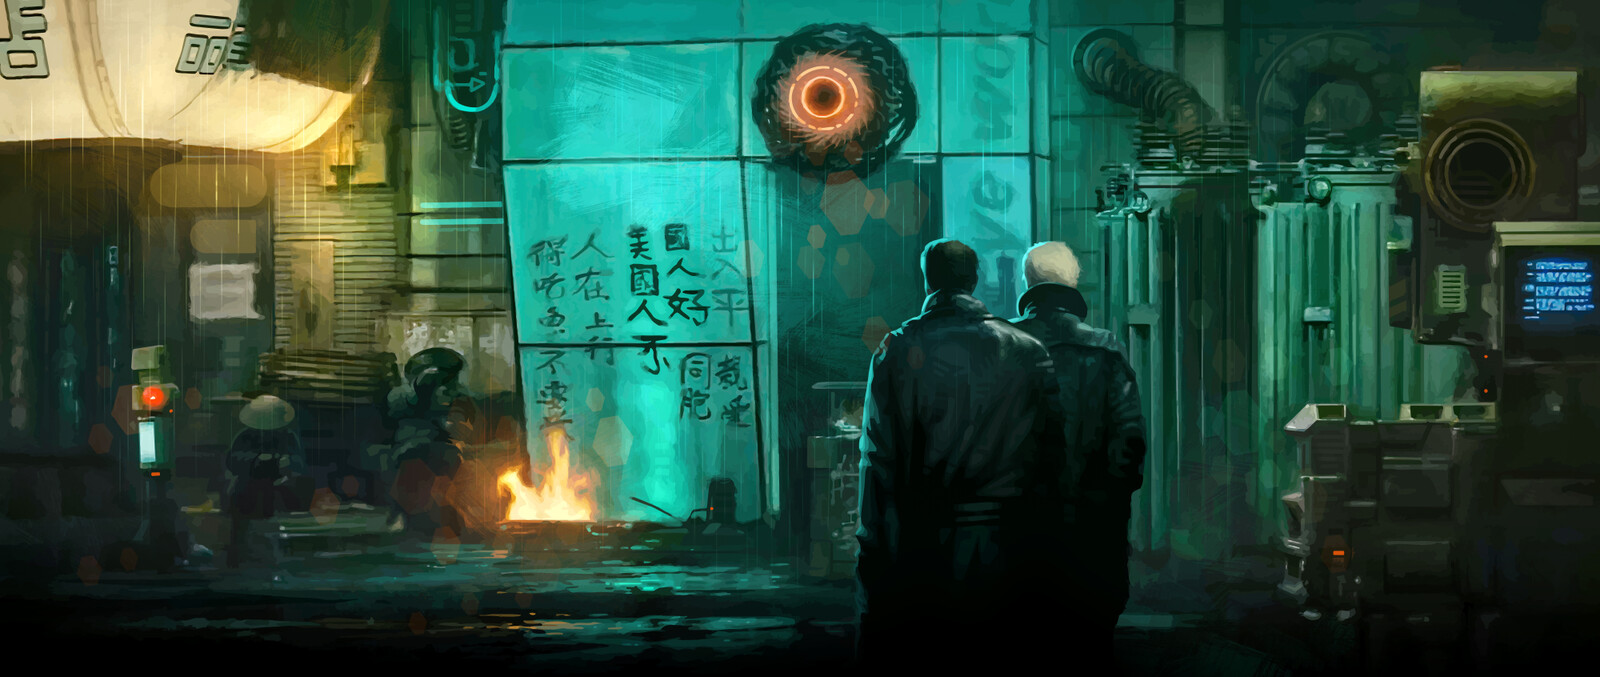 Roy and Leon visit Chew (Blade Runner)